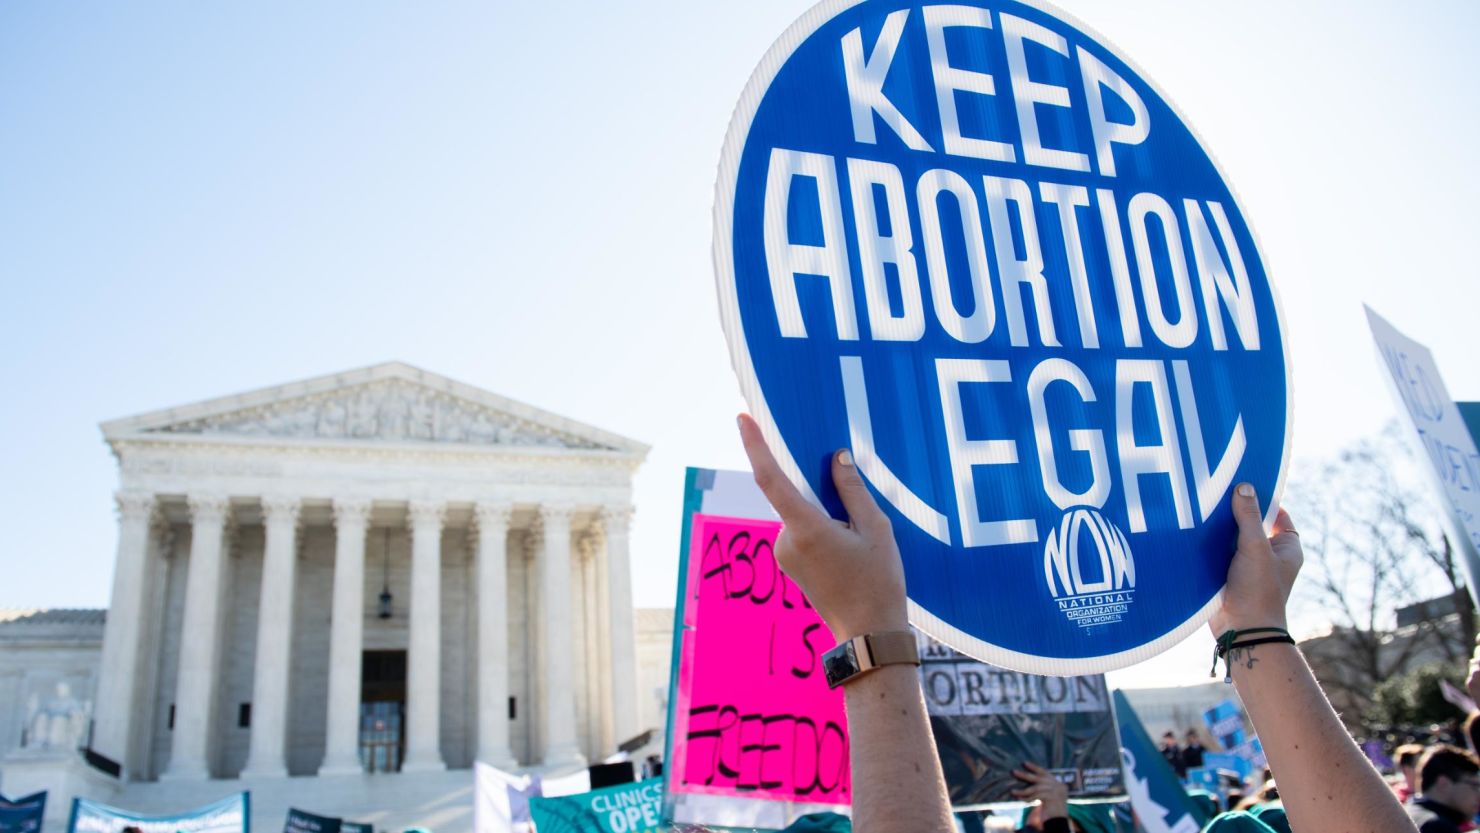 Pro-choice activists supporting legal access to abortion protest during a demonstration outside the US Supreme Court in Washington, DC, March 4, 2020, as the Court heard oral arguments on a Louisiana law about abortion access in the first major abortion case in years. 